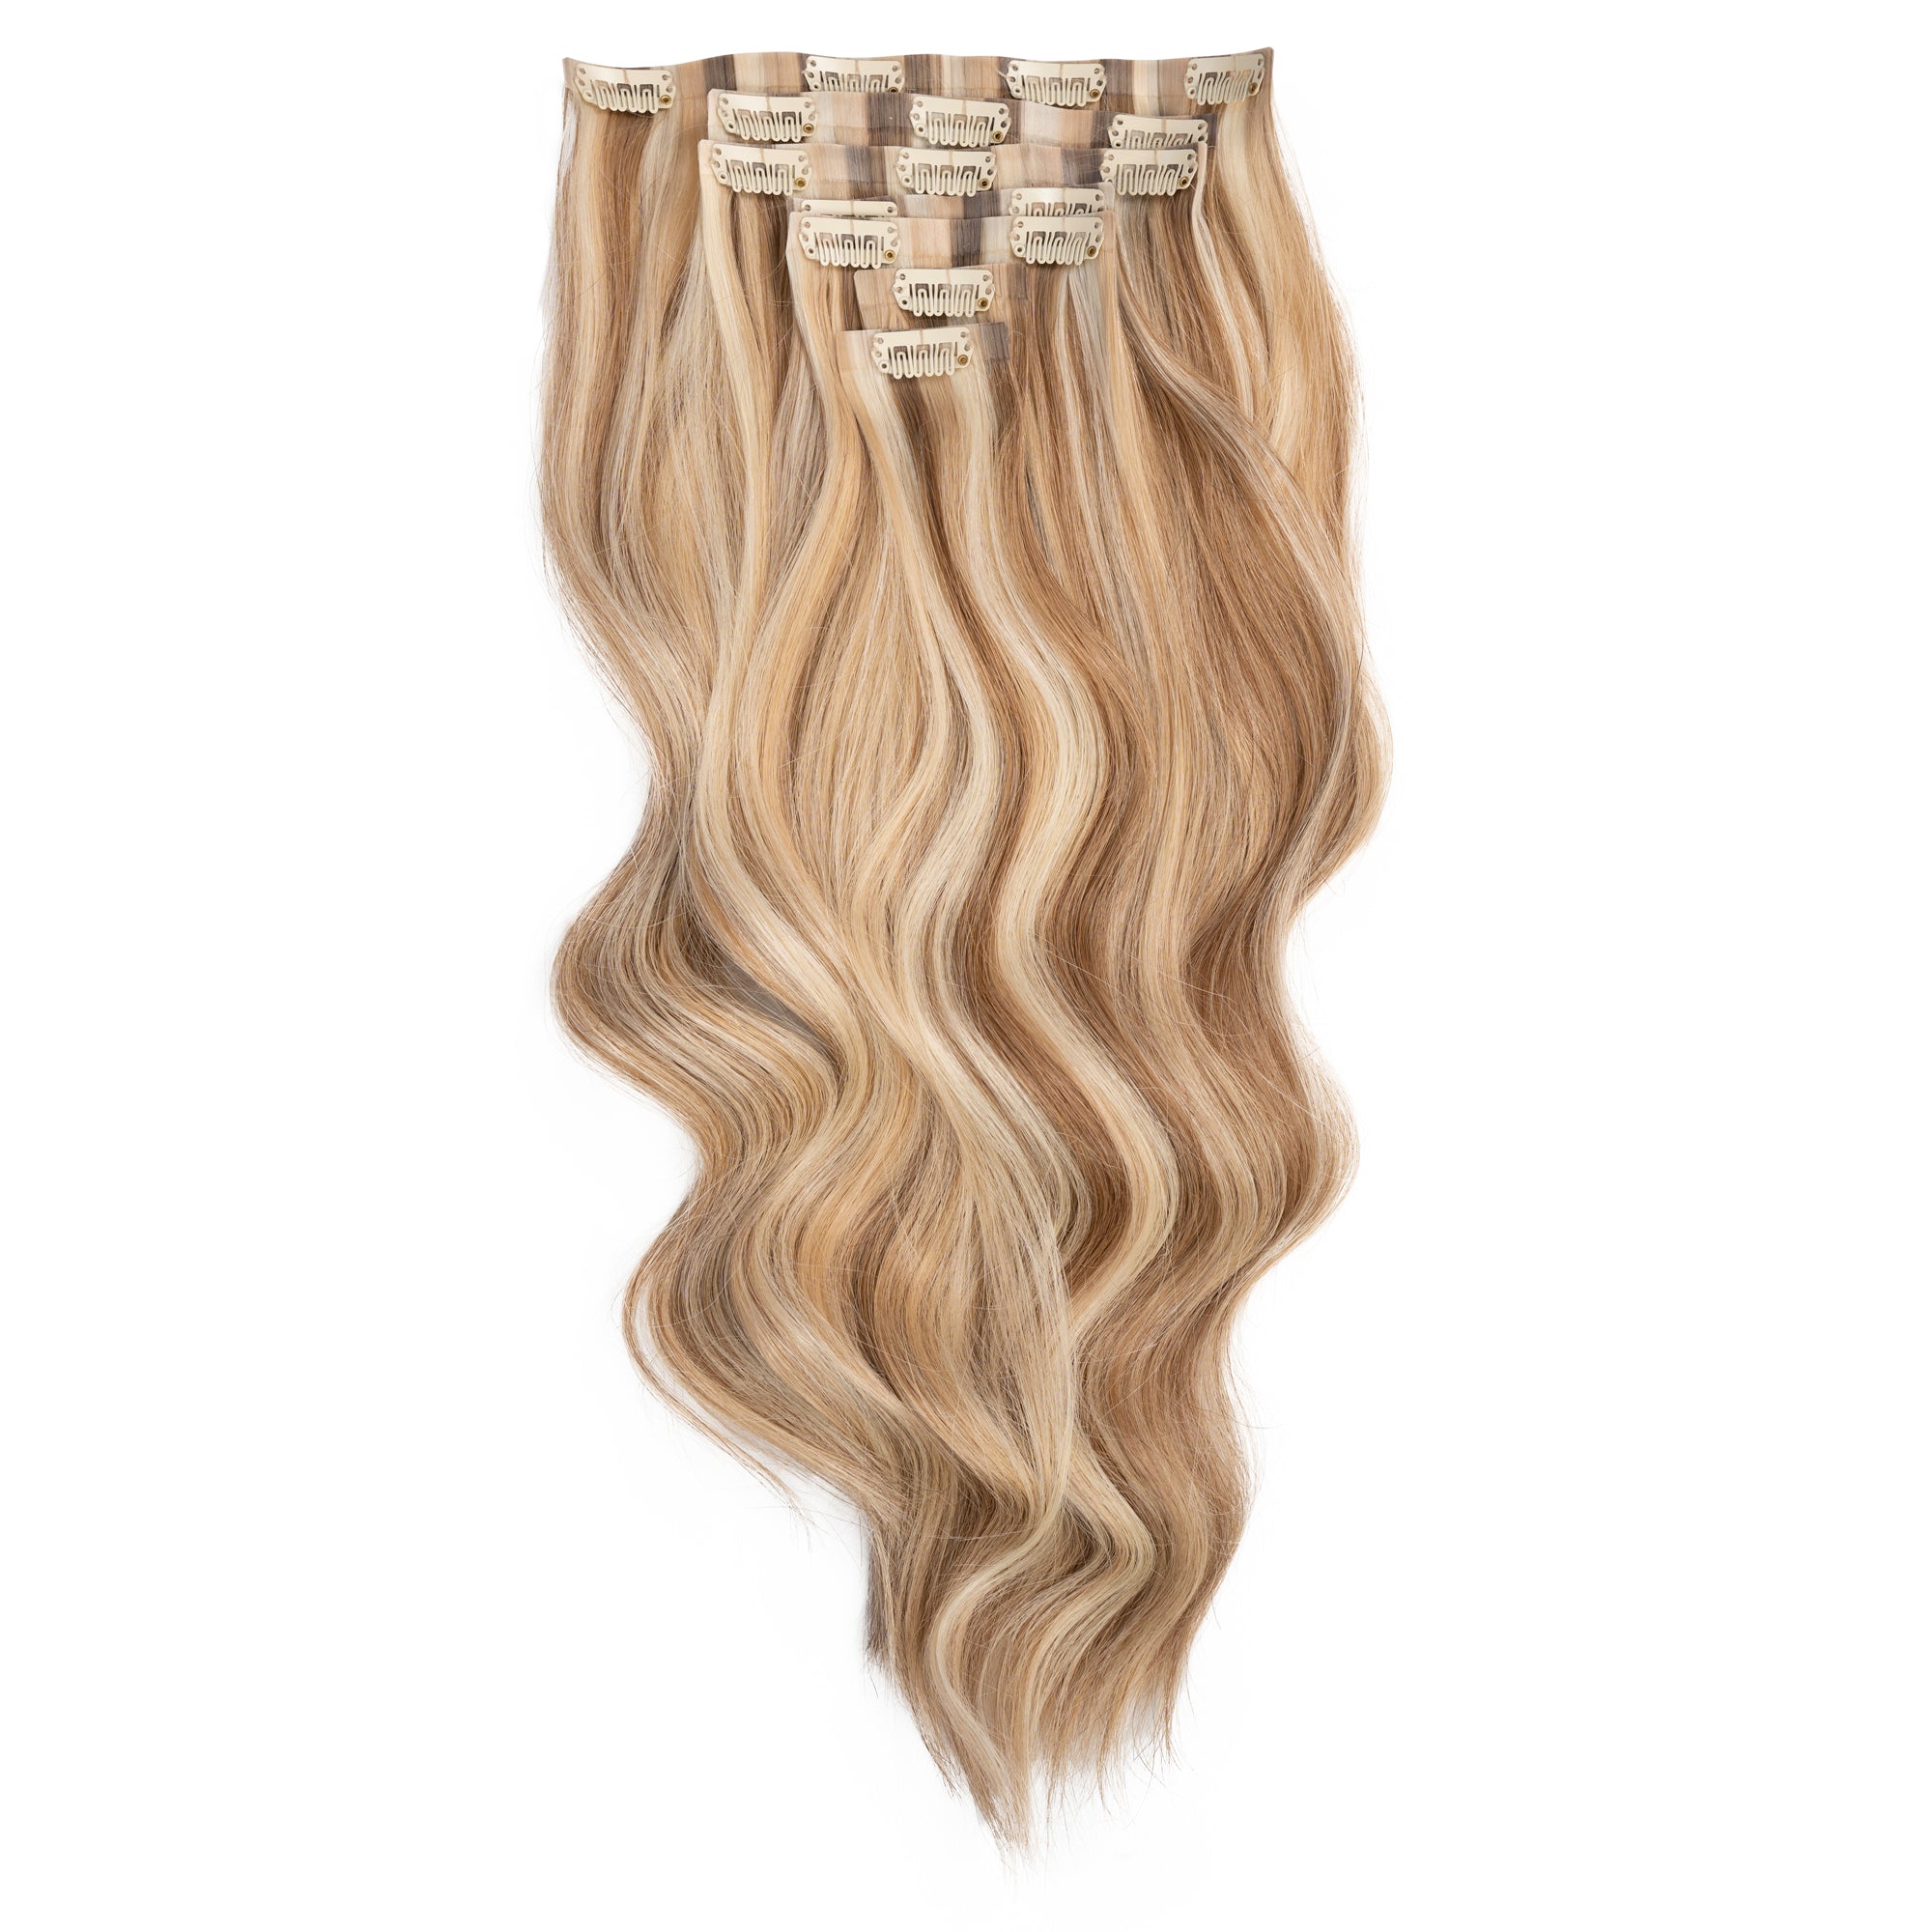 Duchess Elegant Clip-in Hair Extensions 16" Colour P10 16 613 - Maneology Hair Extensions